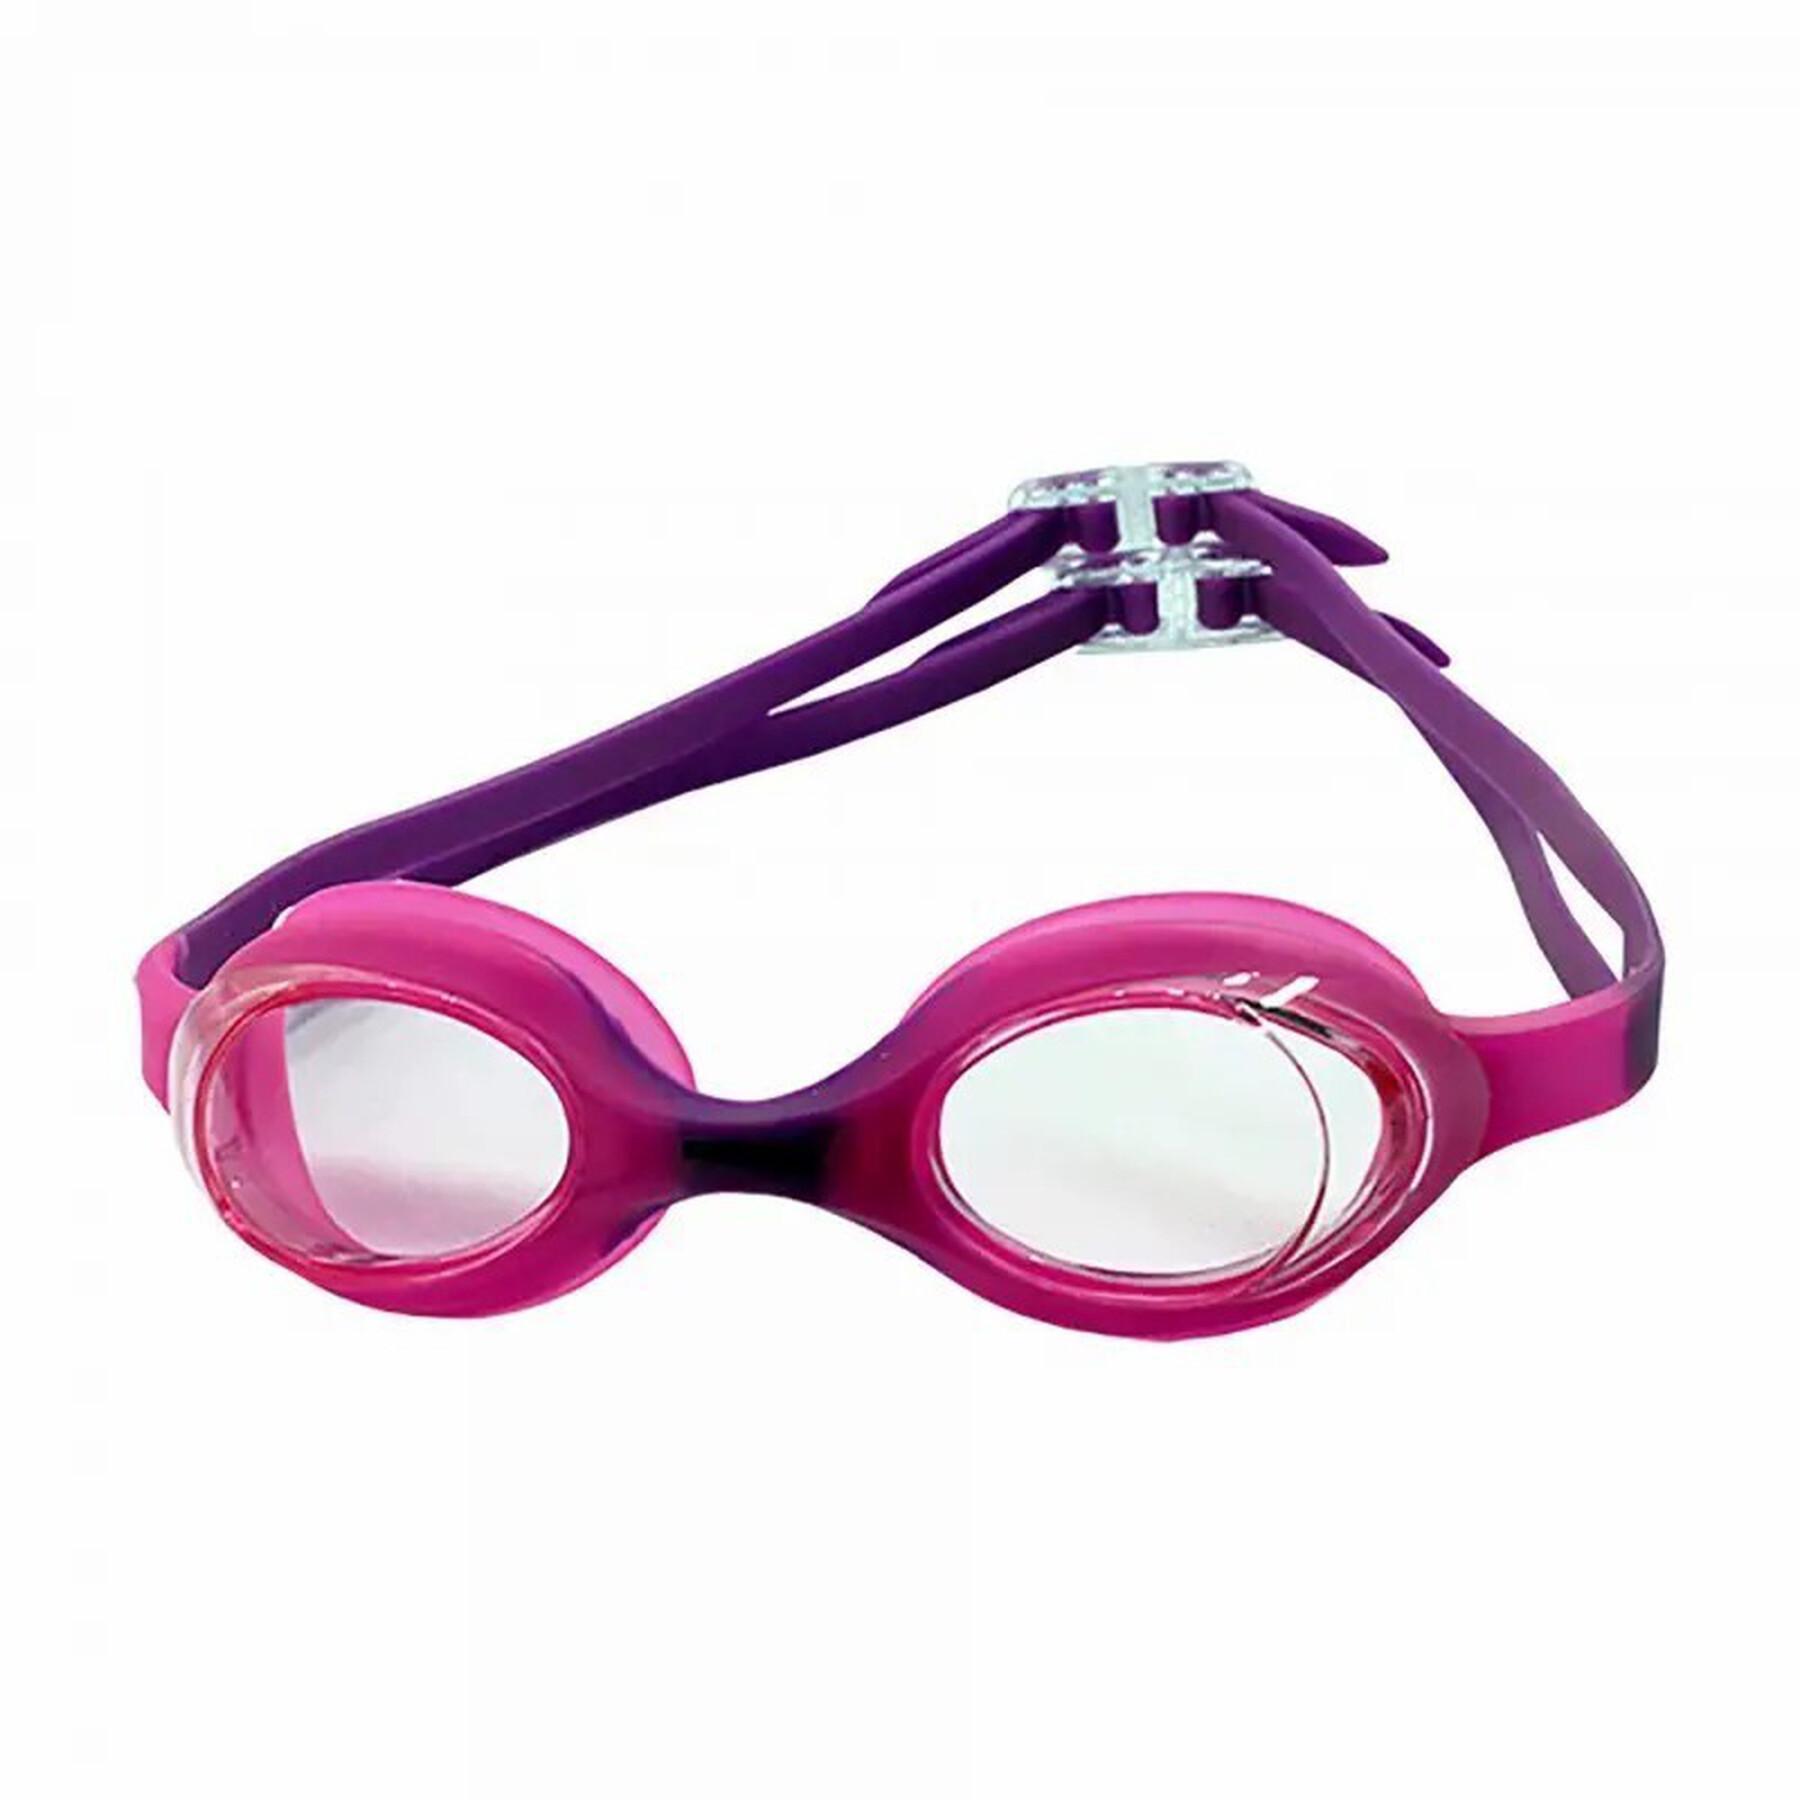 Baby swimming goggles Softee Alexis